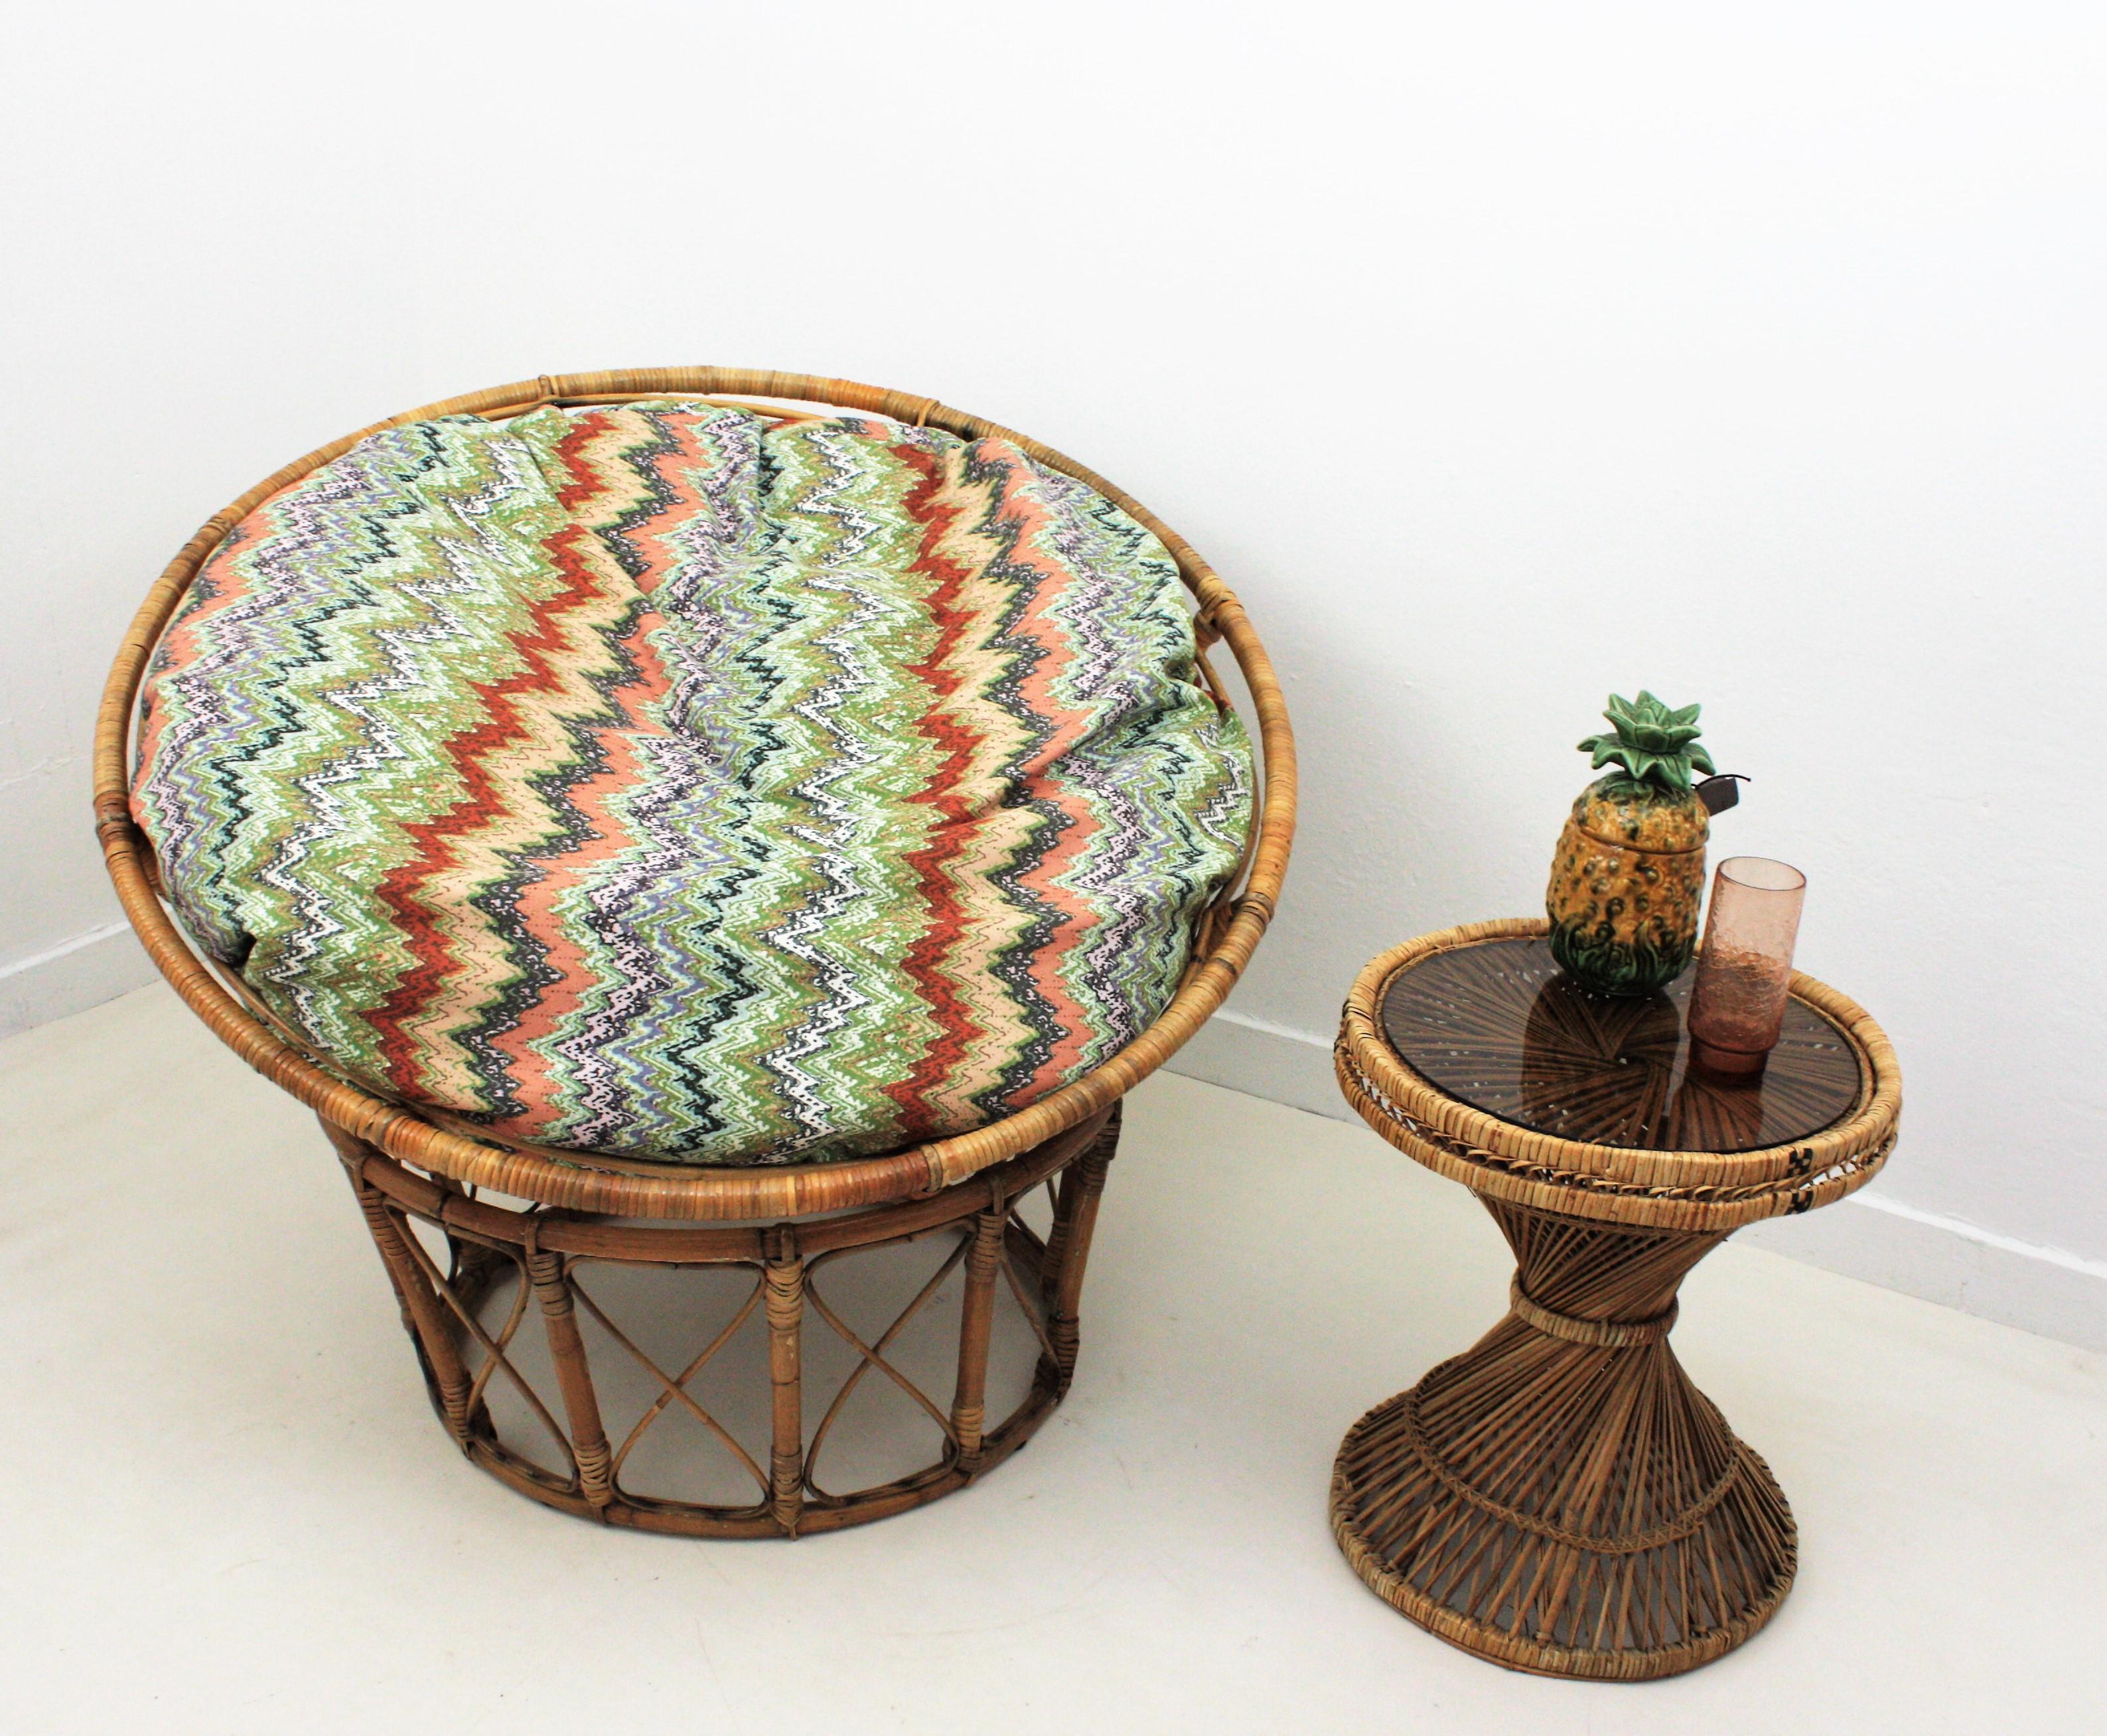 Huge bamboo and rattan Papasan chair with colorful Missoni striped cushion, Philippines, 1950s-1960s.
This eye-catching and comfortable swivel lounge chair is constructed with bamboo and rattan canes creating a concentric circles